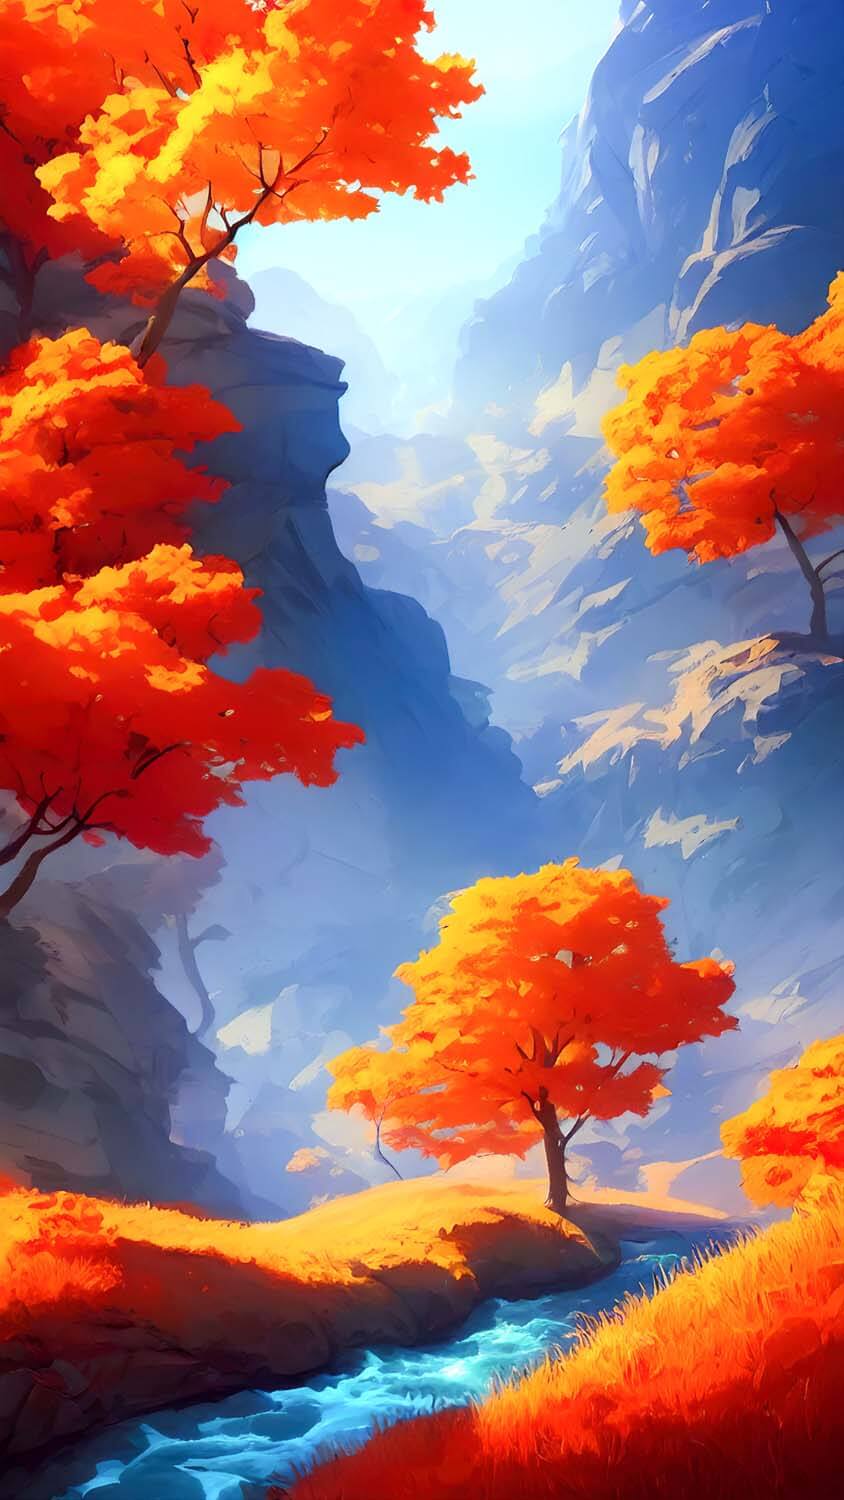 Autumn Painting IPhone Wallpaper HD - IPhone Wallpapers : iPhone Wallpapers